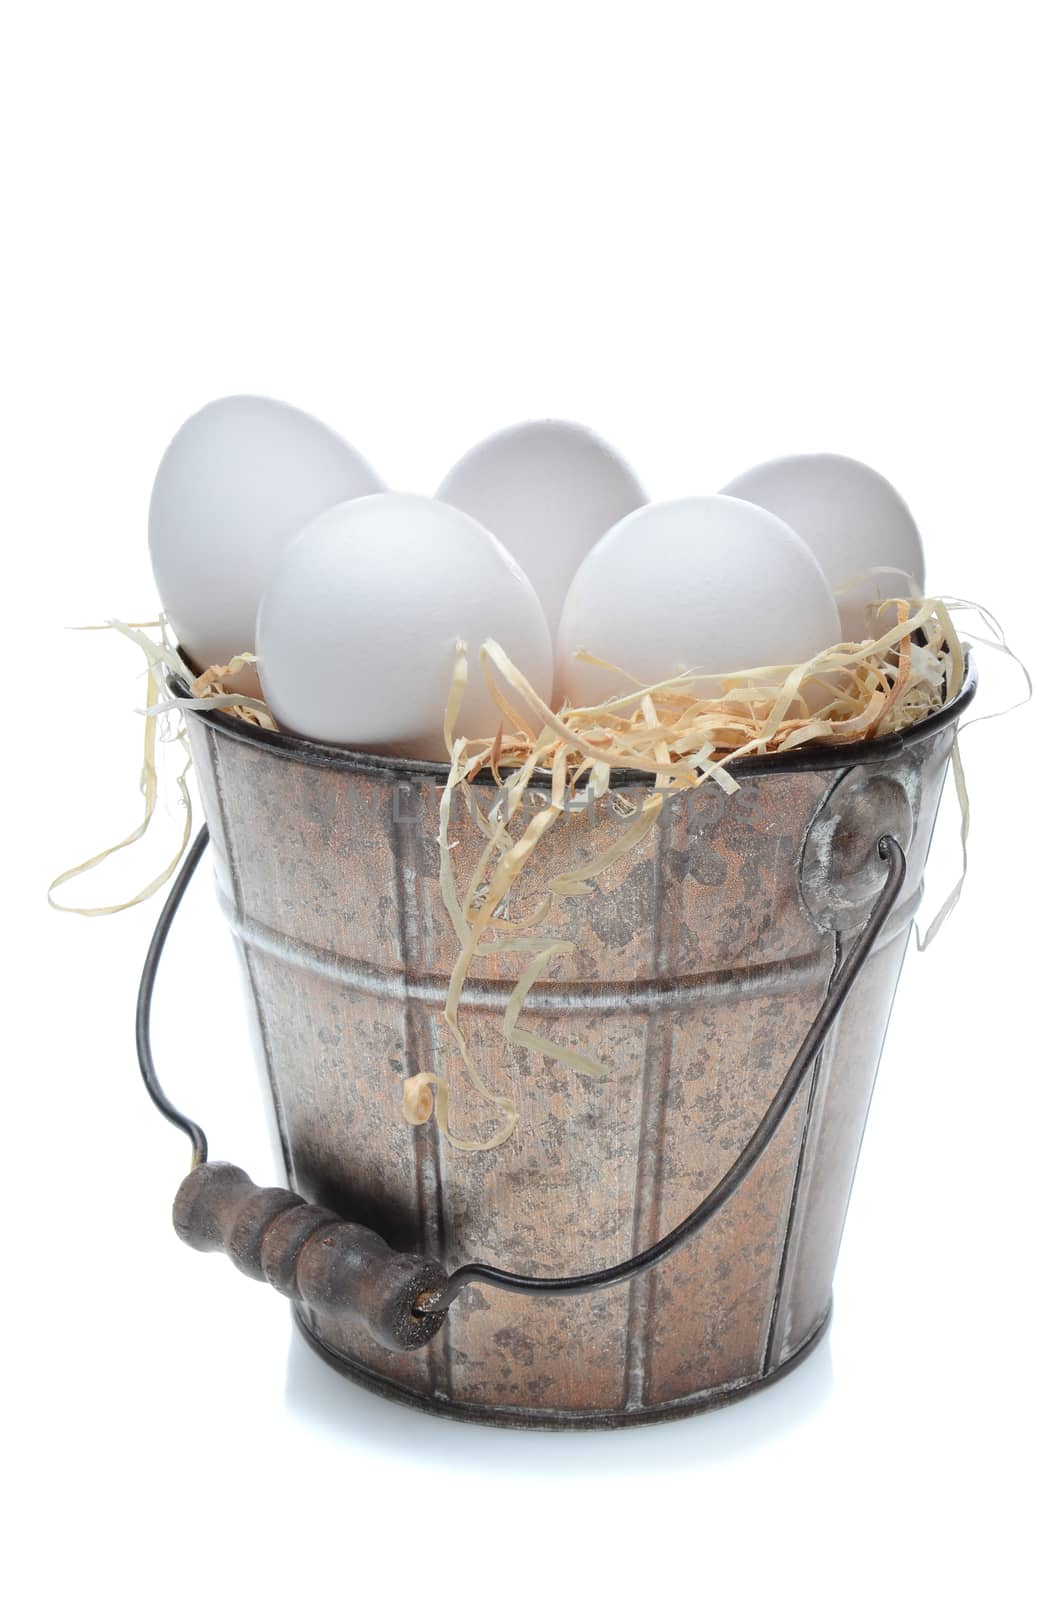 Eggs in an Old Fashioned Bucket by sCukrov